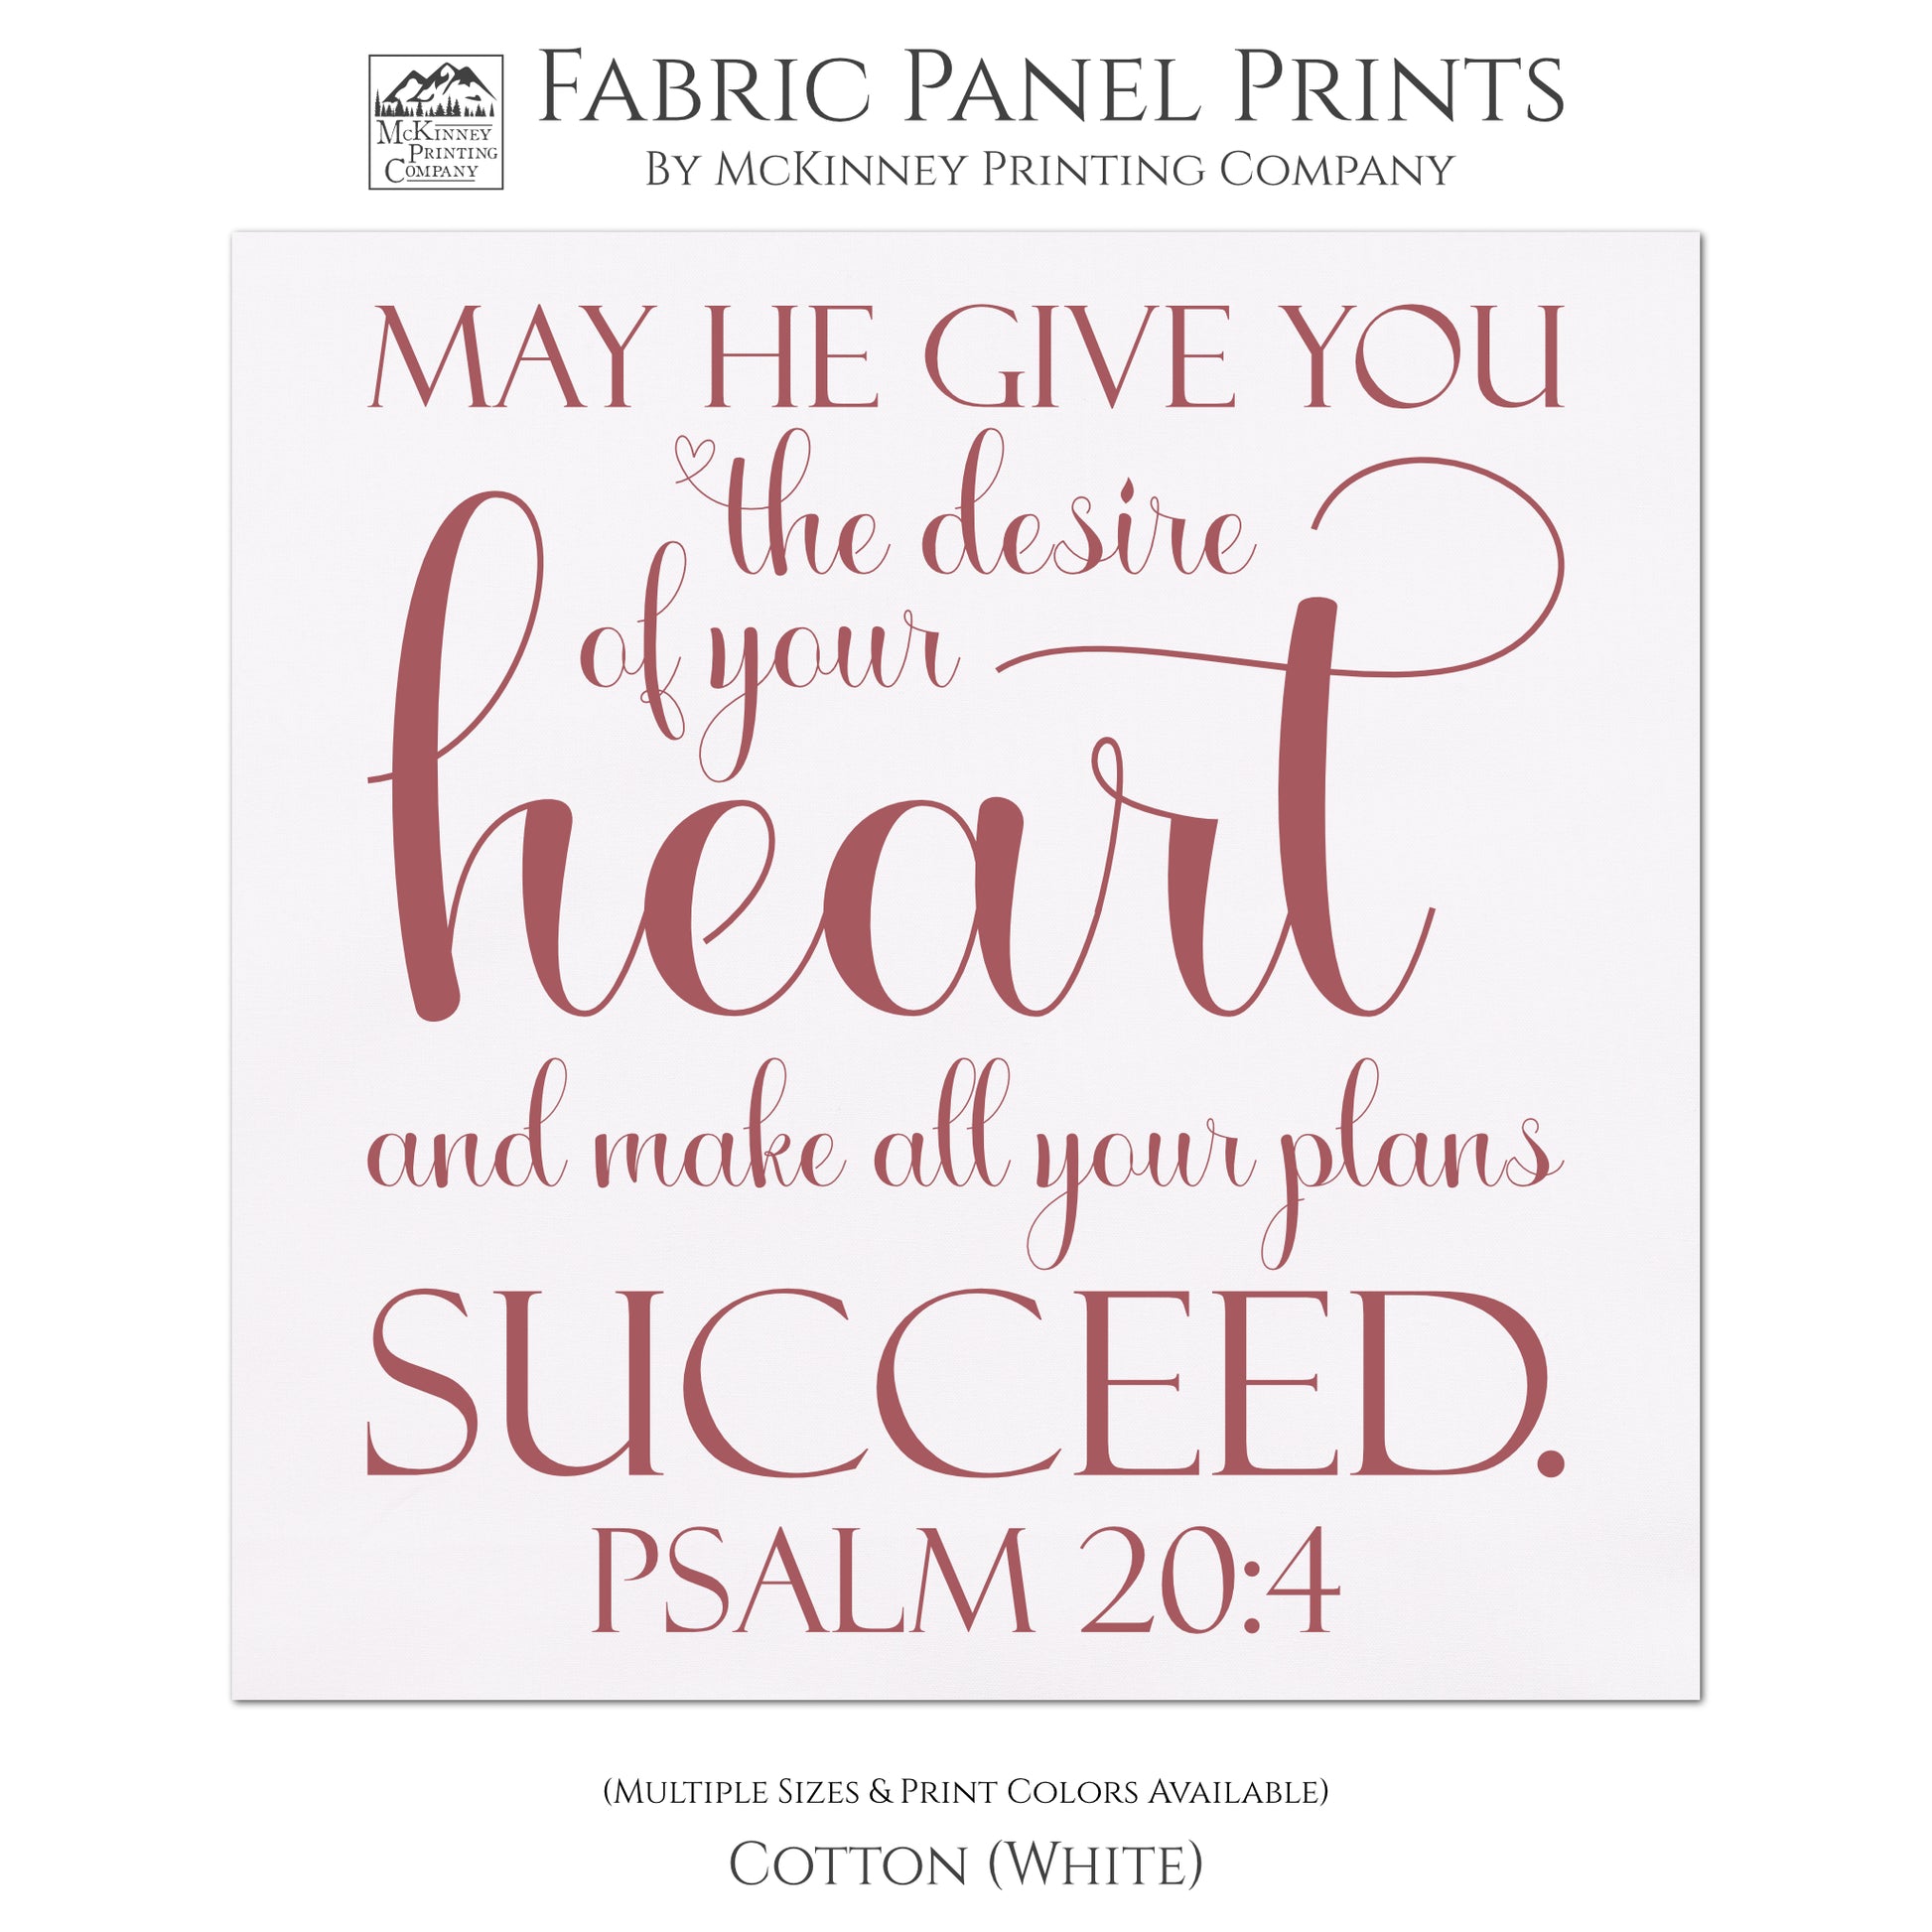 May He give you the desire of your heart and make all your plans succeed - Psalm 20:4 - Religious Fabric, Wall Hanging, Quilt Block, Sewing Craft, Pillow - Cotton, White